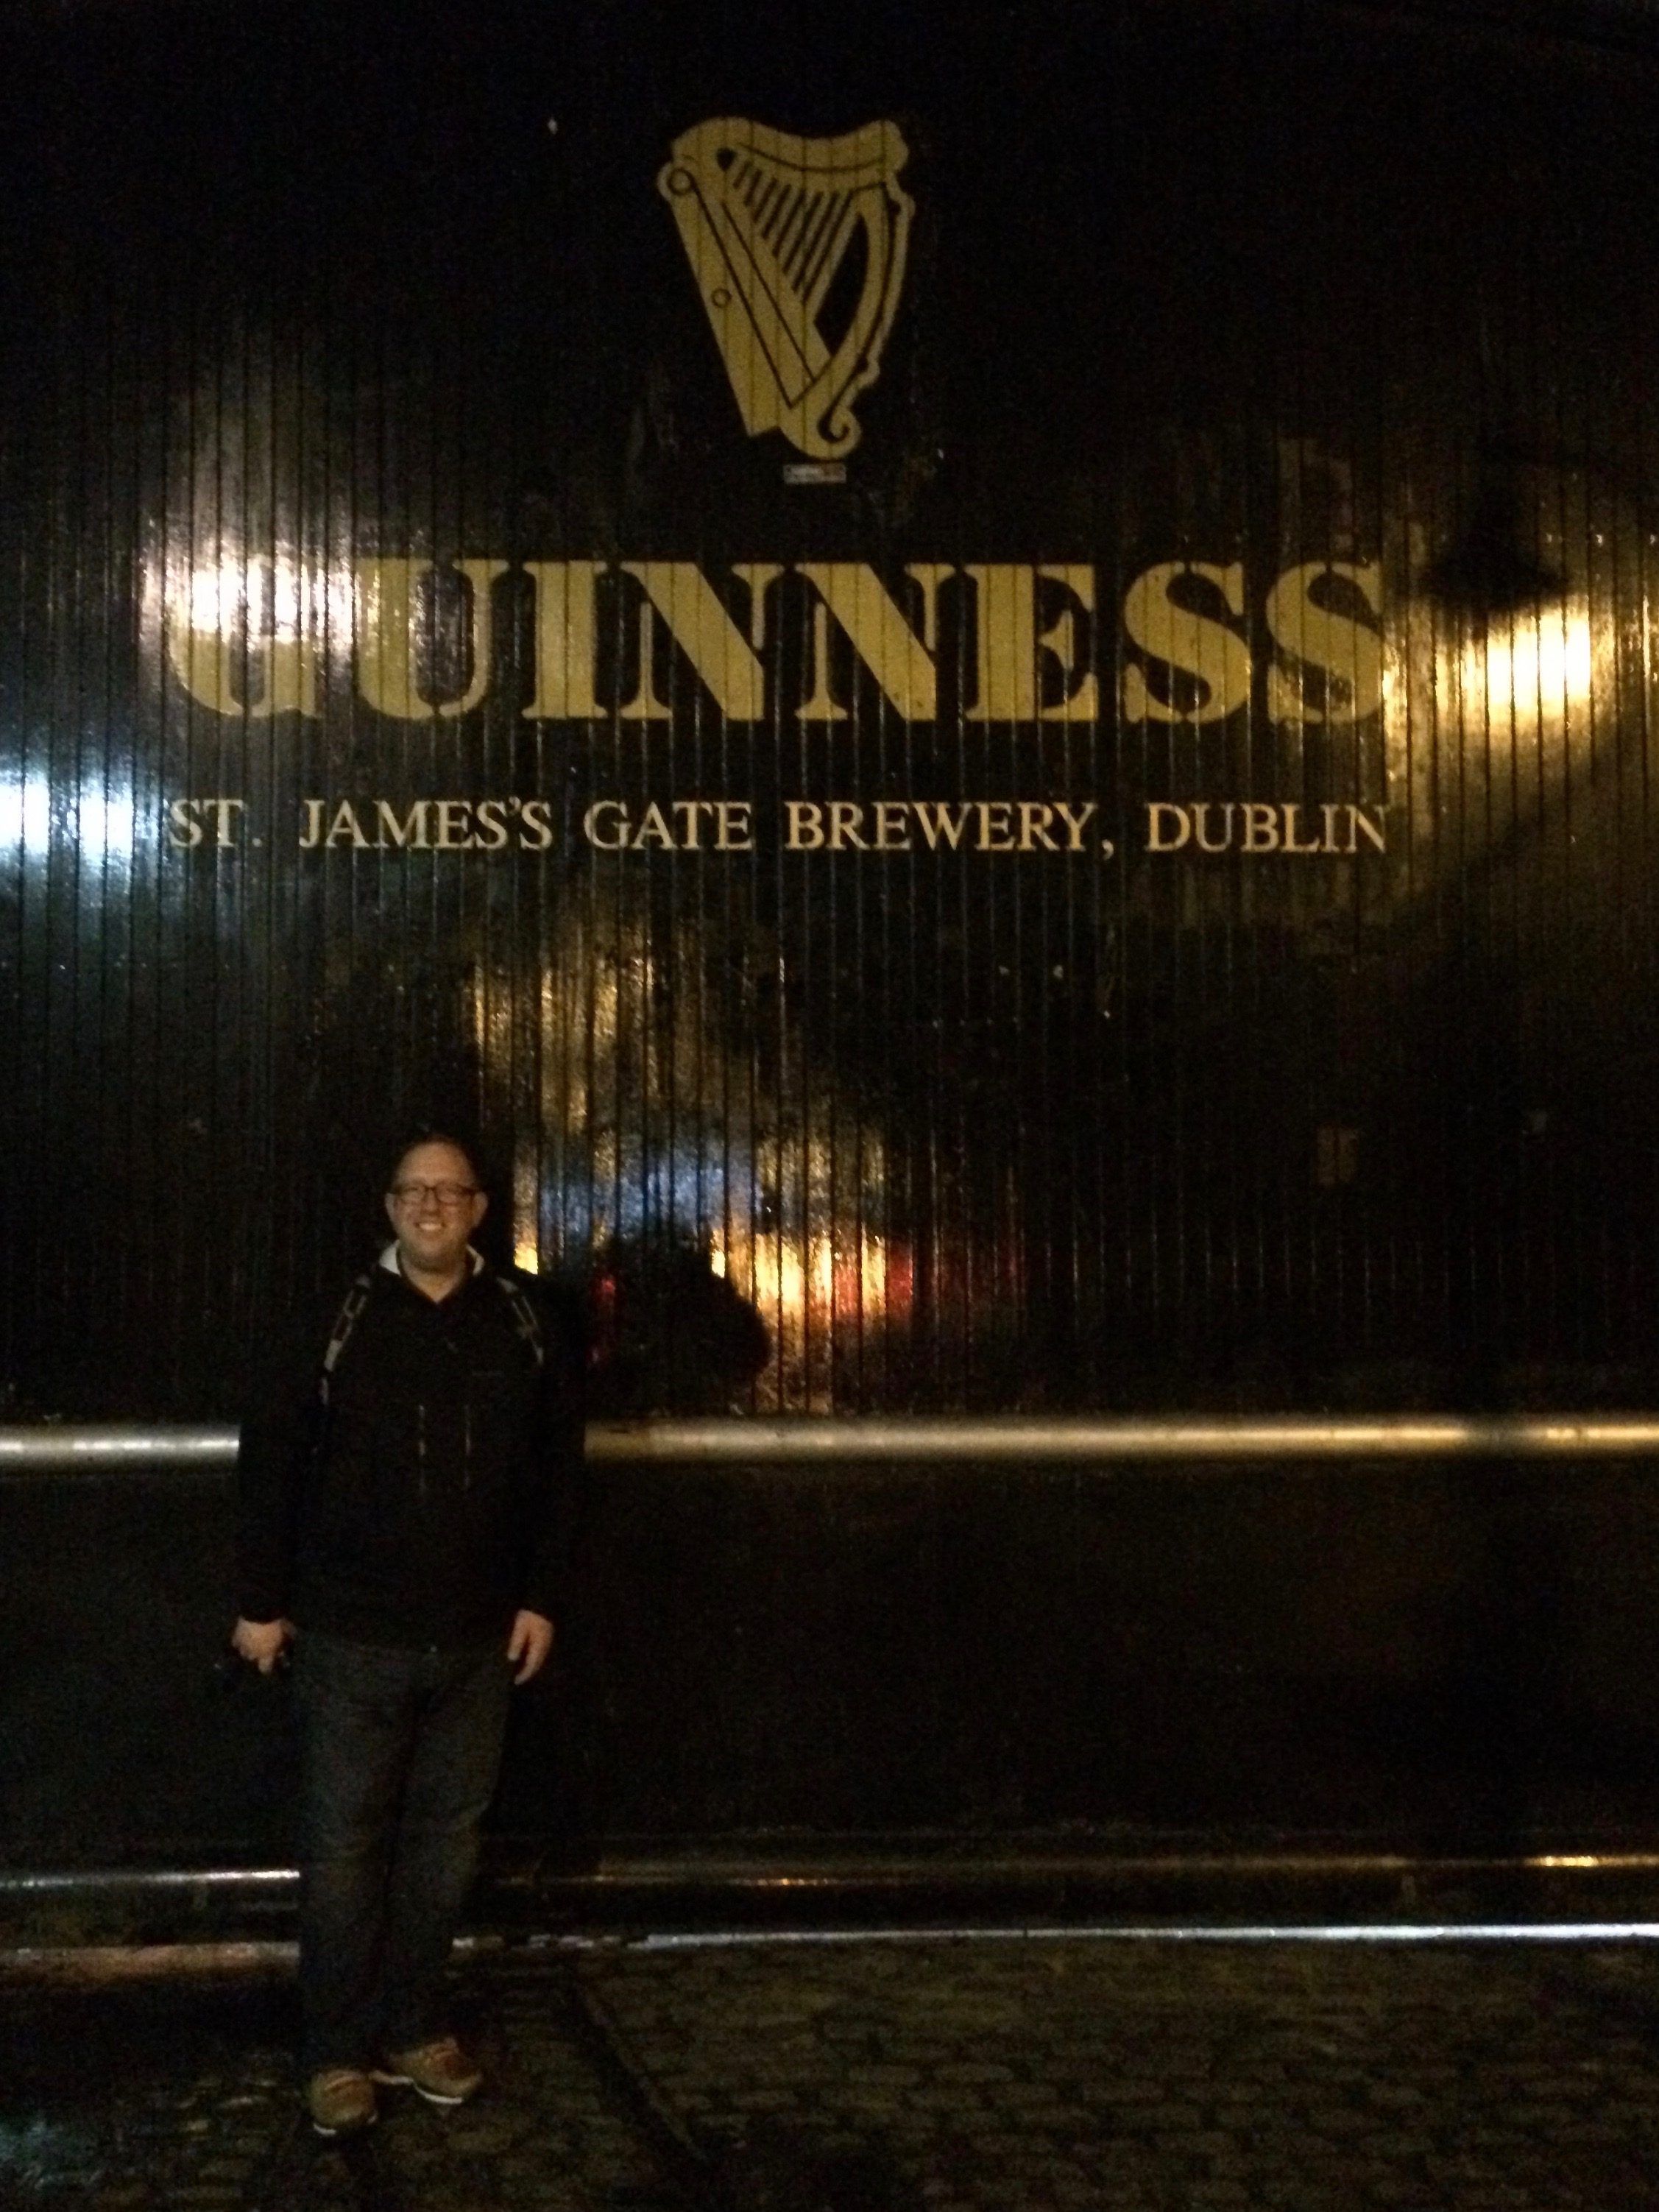 Standing outside in front of the famous Guinness Gates at St. James's Gate.